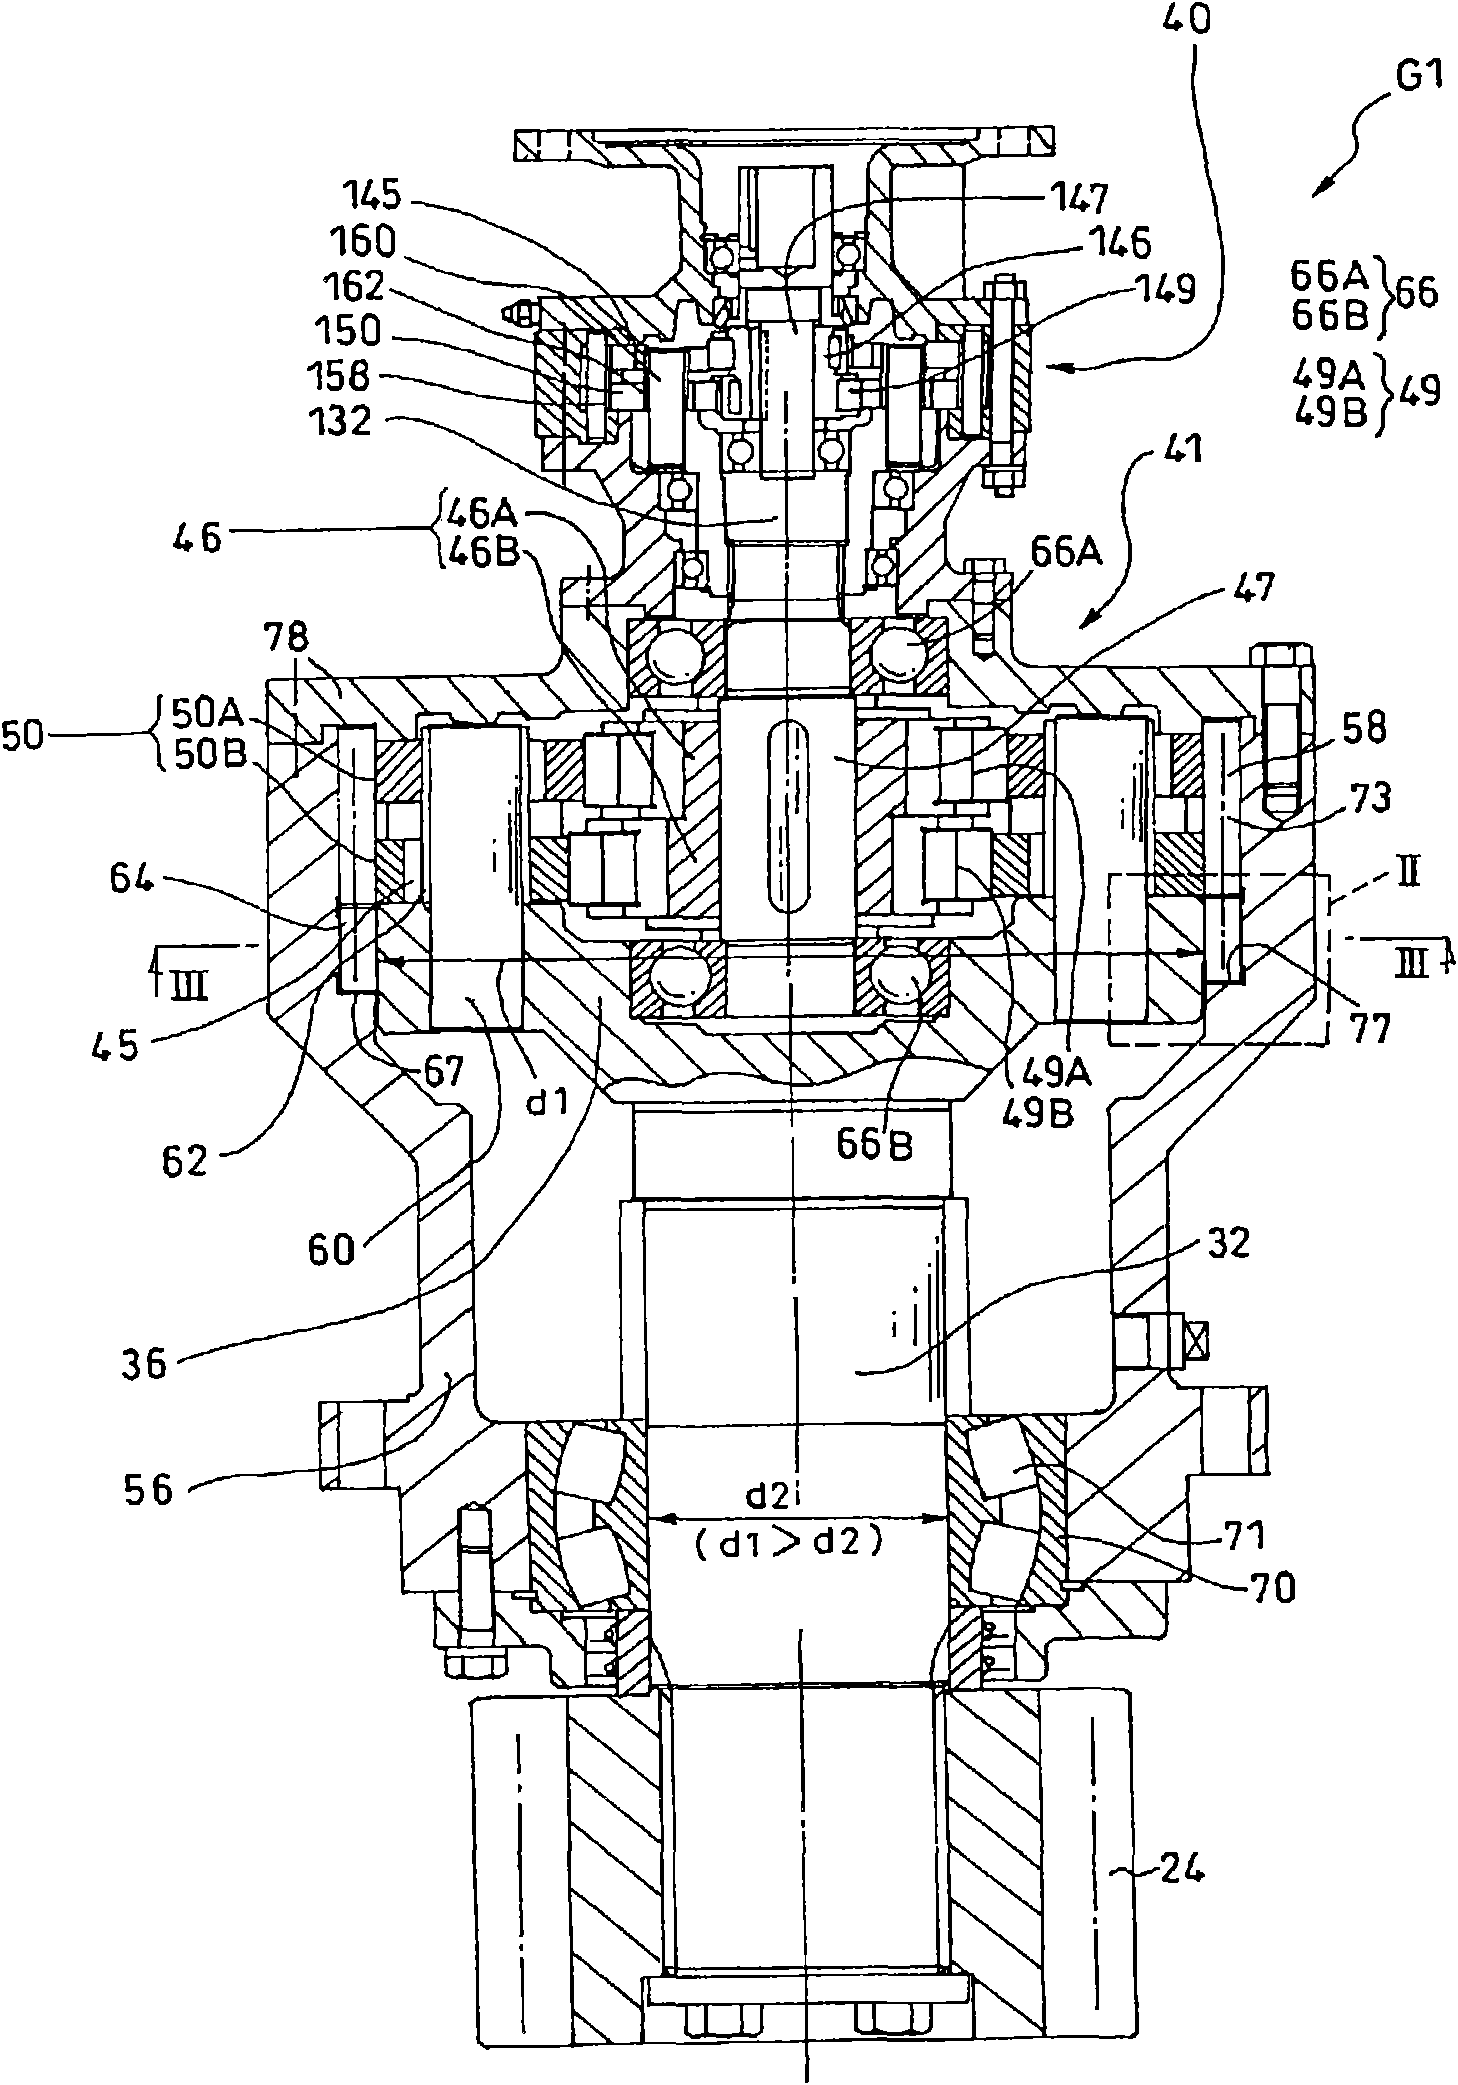 Reduction gear for natural energy recovery system